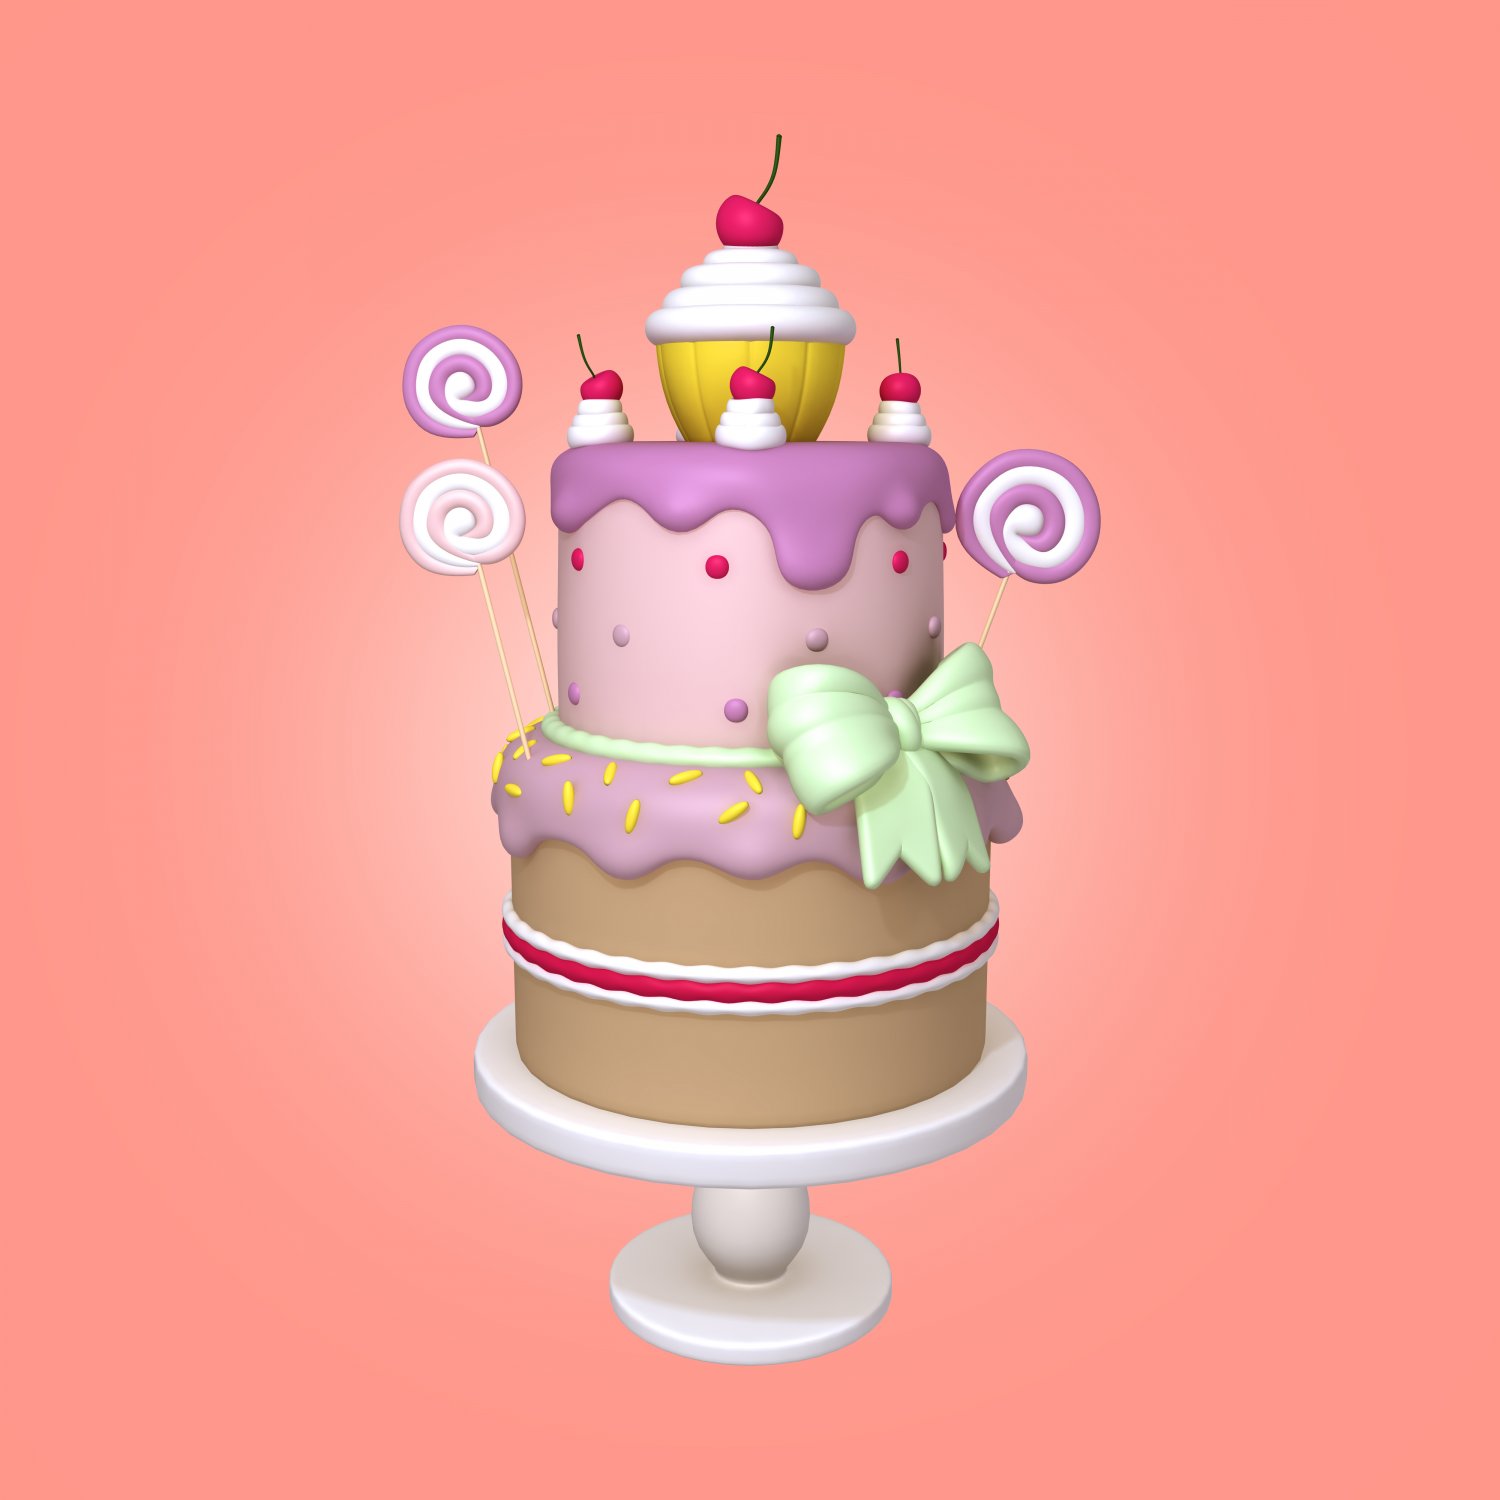 Real Cake Maker 3D Bakery 1.8.8 Free Download